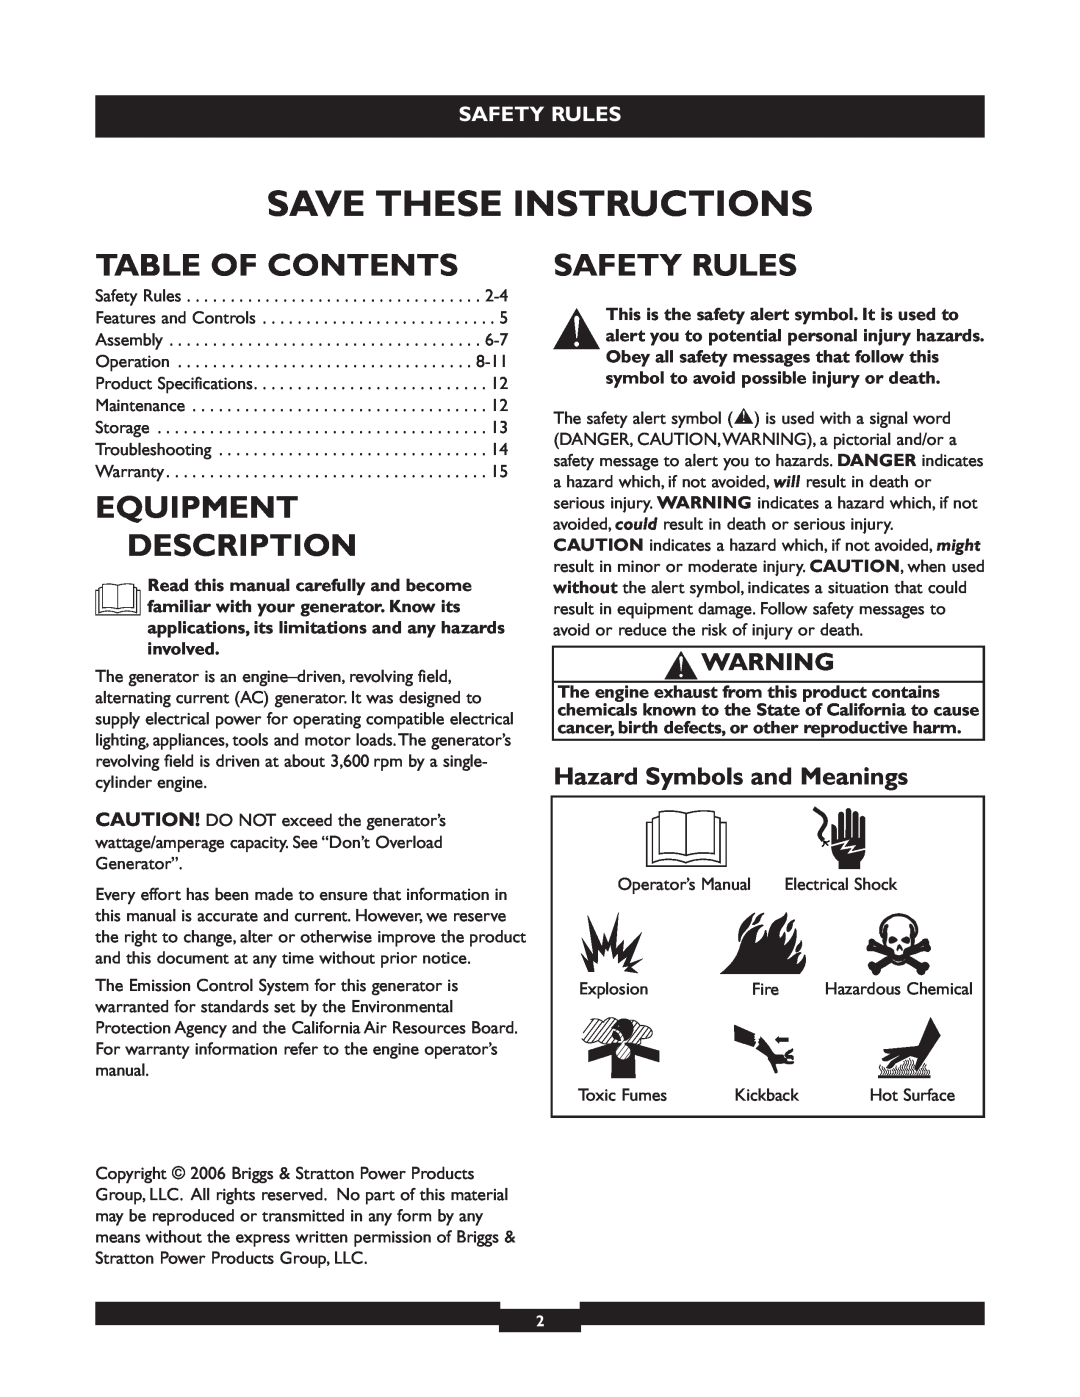 Briggs & Stratton 01655-3 Table Of Contents, Equipment Description, Safety Rules, Hazard Symbols and Meanings 